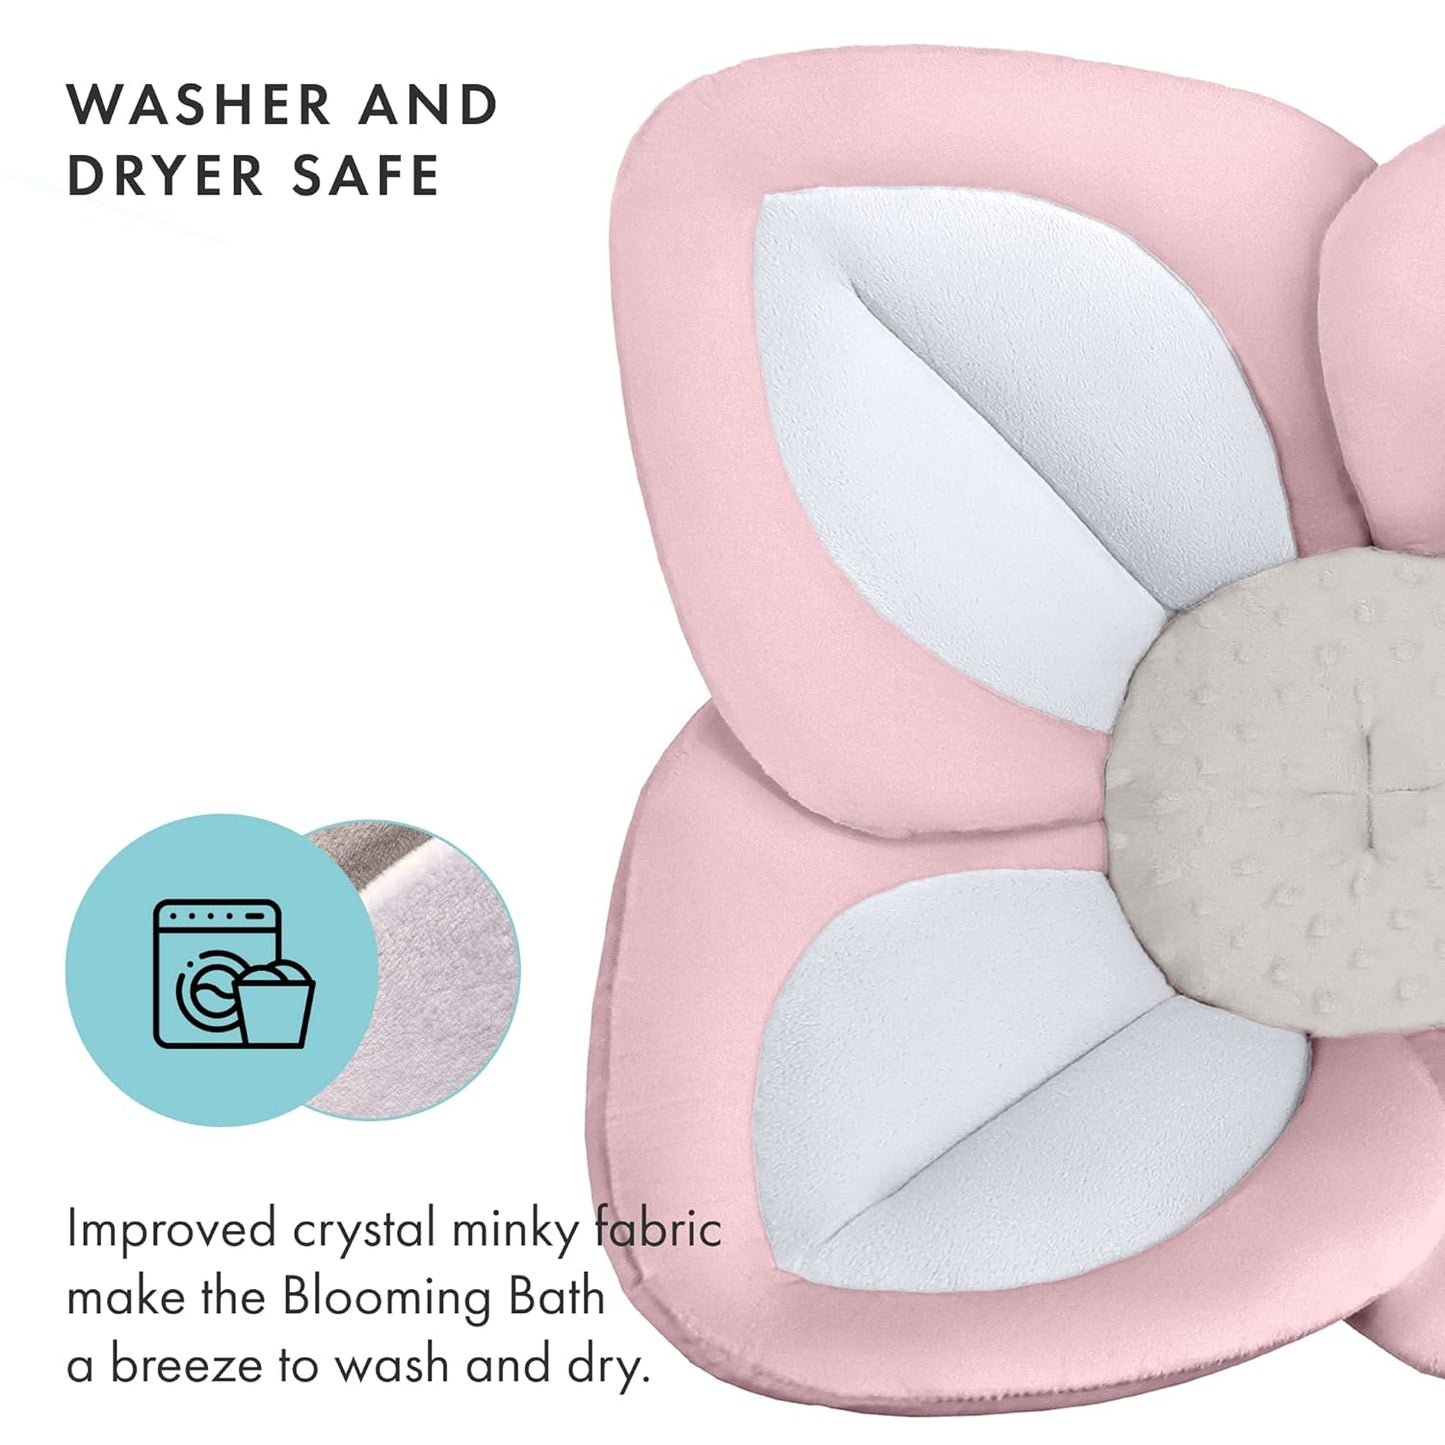 Blooming Bath Baby Bath Seat - Baby Tubs for Newborn Infants to Toddler 0 to 6 Months and Up - Baby Essentials Must Haves - The Original Washer-Safe Flower Seat (Lotus, Gray/Dark Gray)